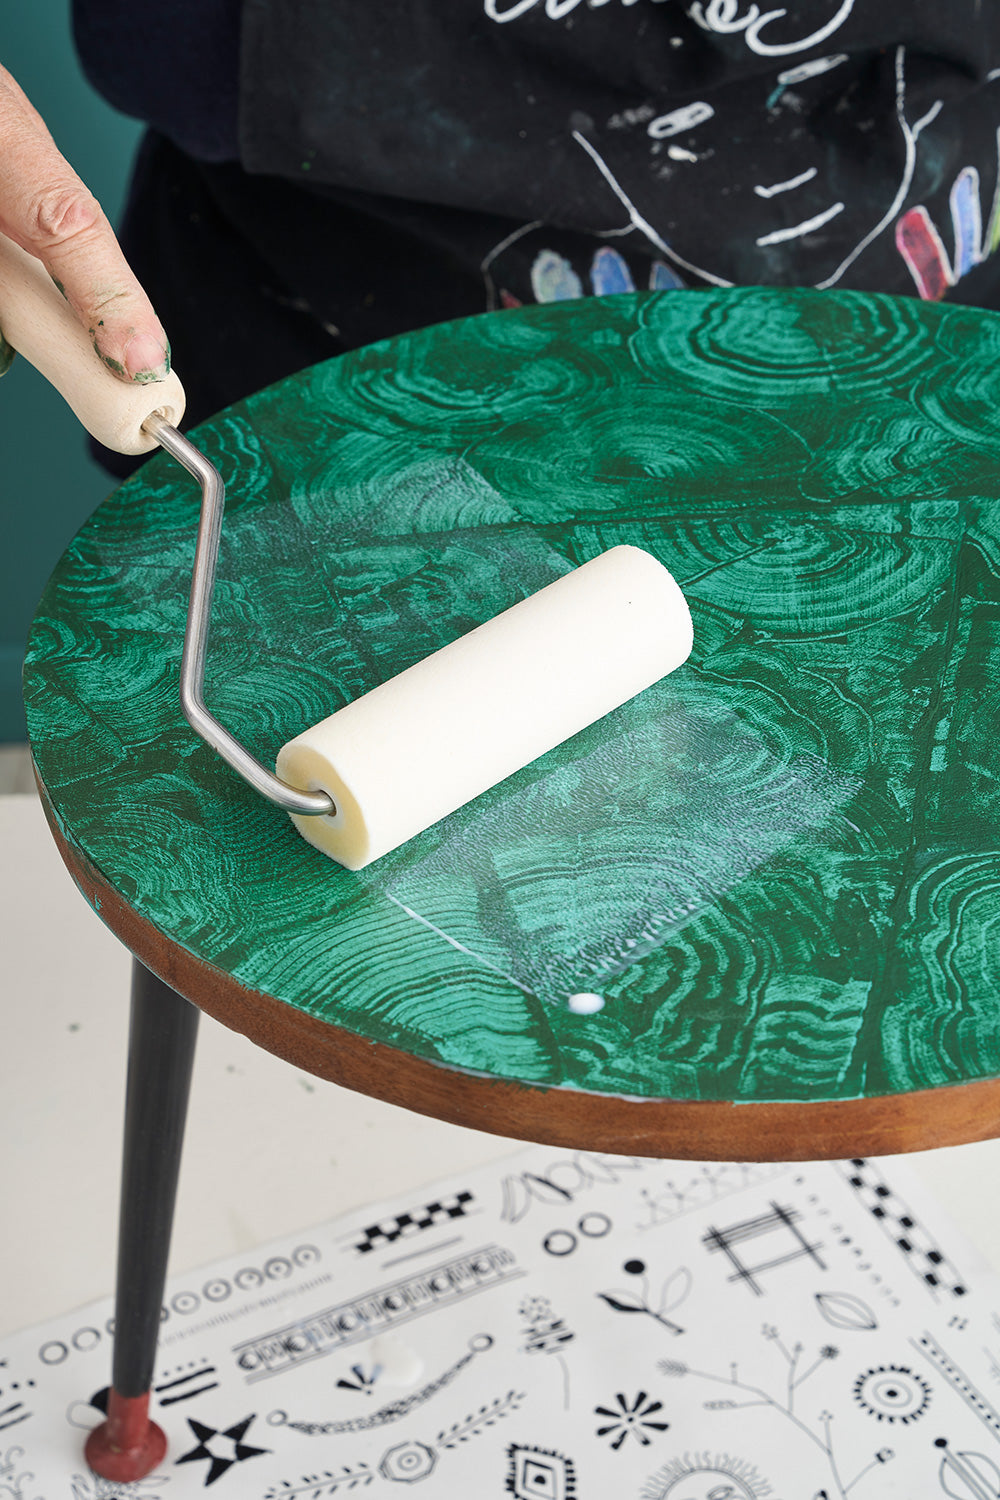 HOW TO: Seal Chalk Paint